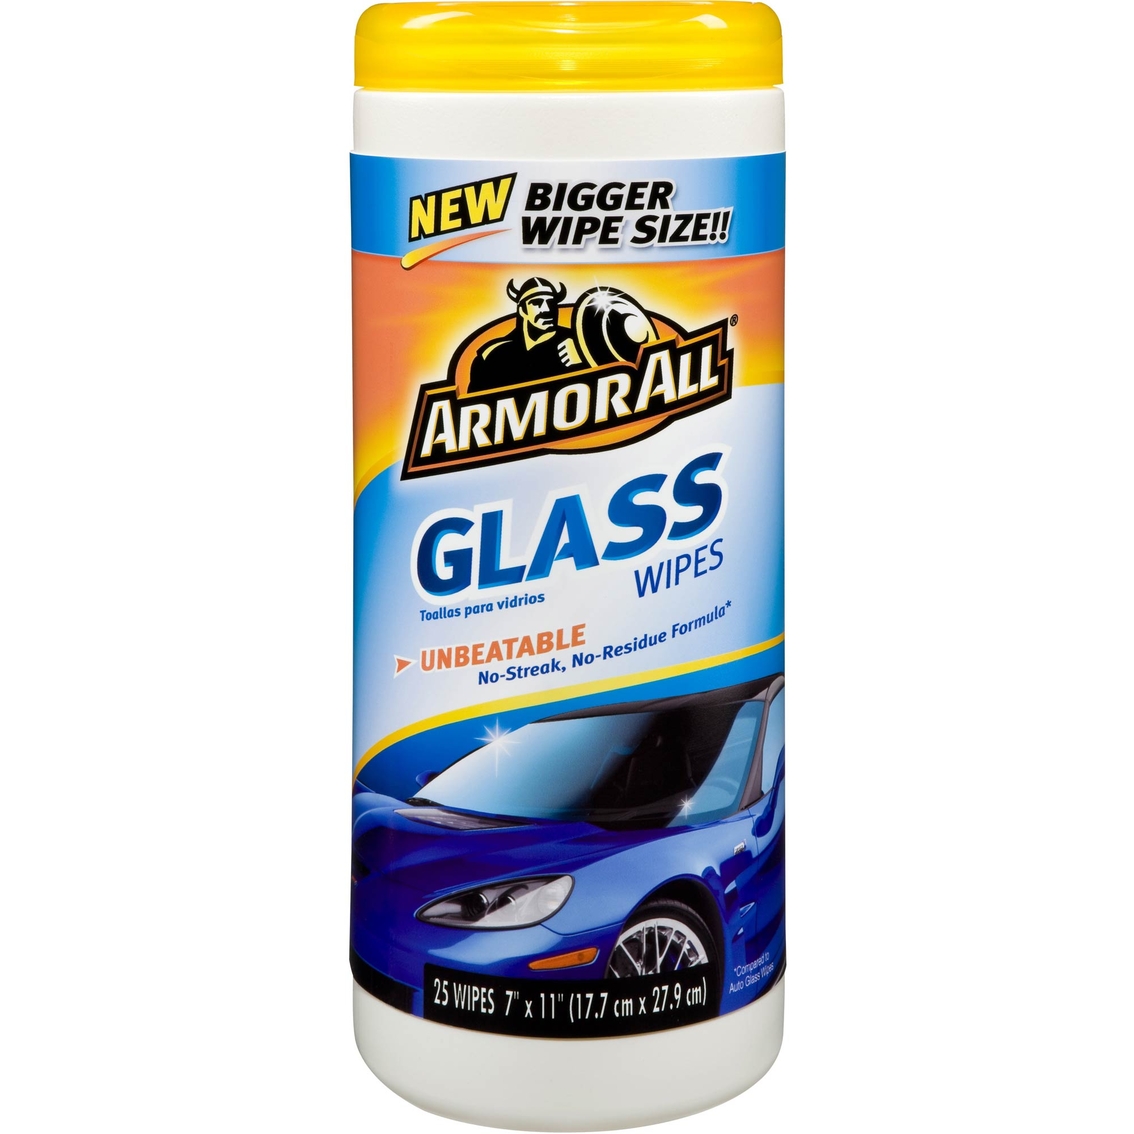 Armor All Glass Wipes 30 ct.